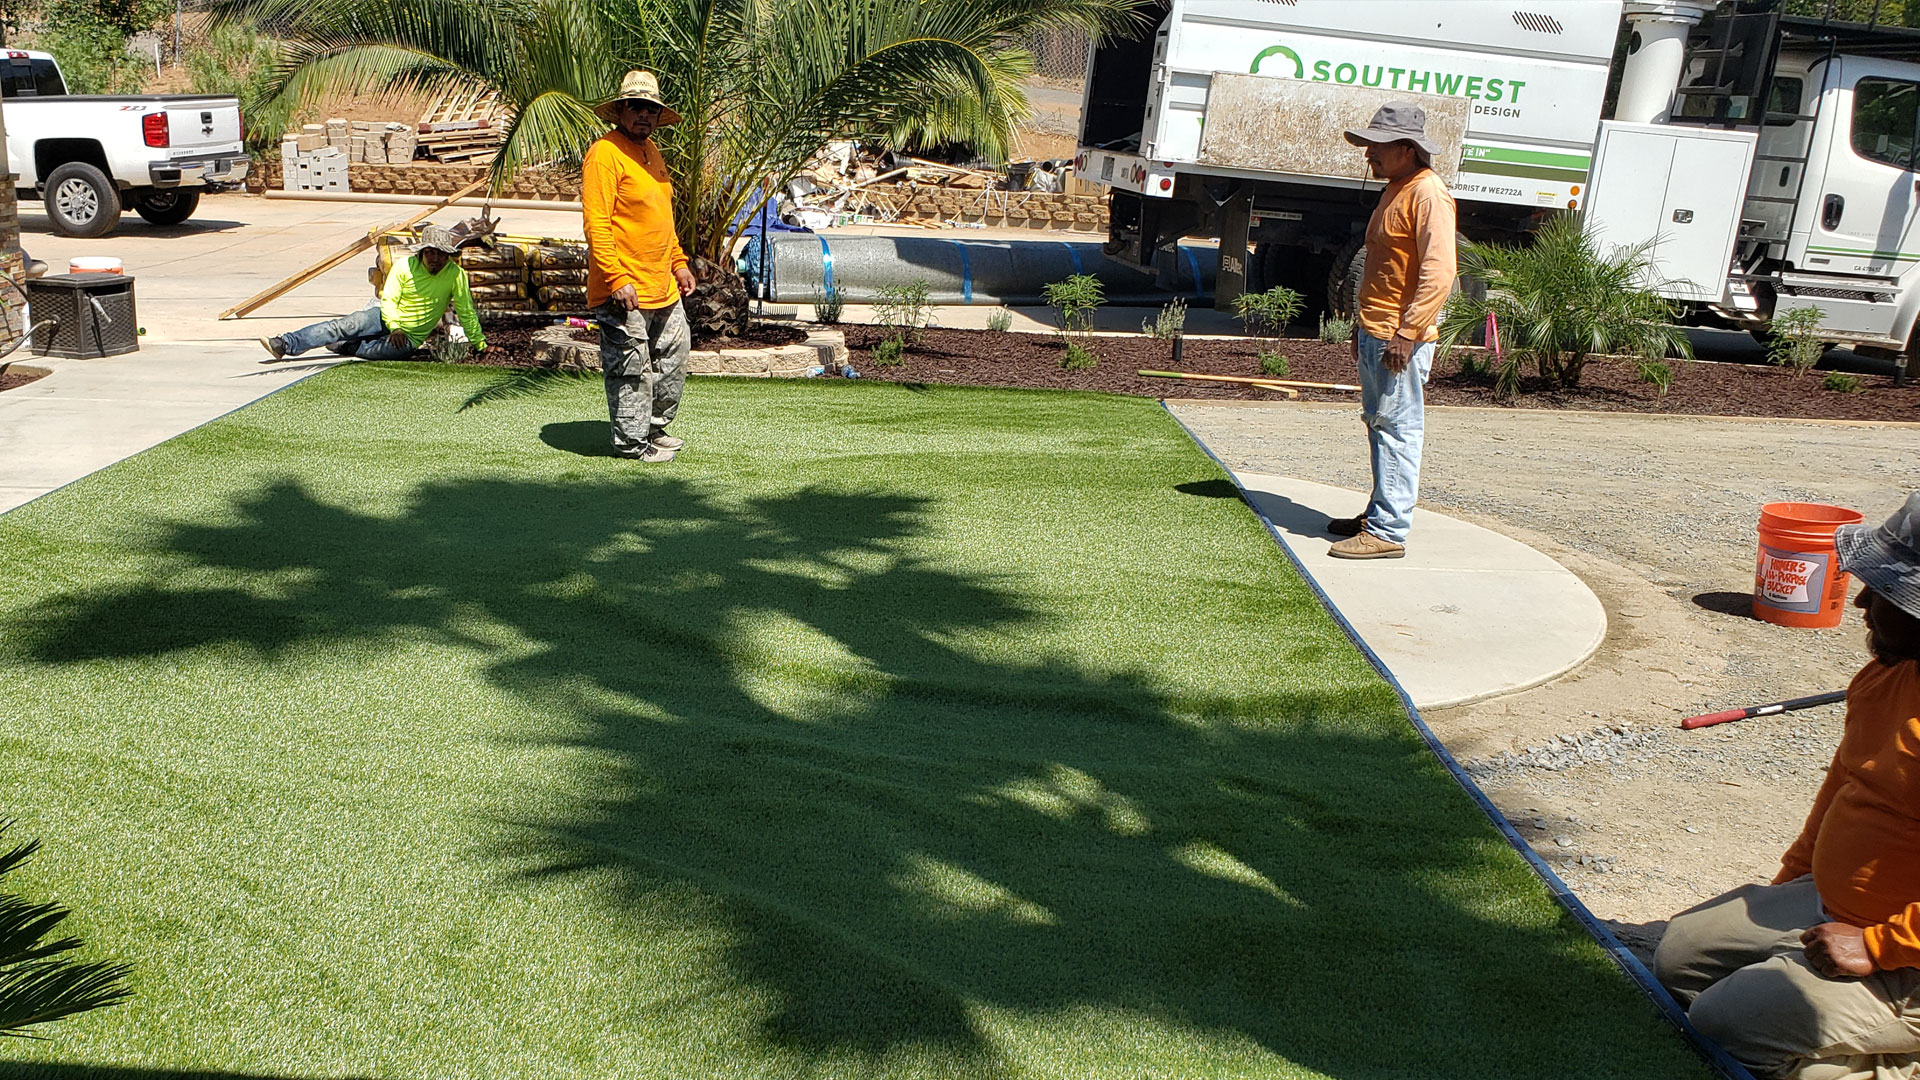 New landscaping and sod installation at a home in Vista, CA.